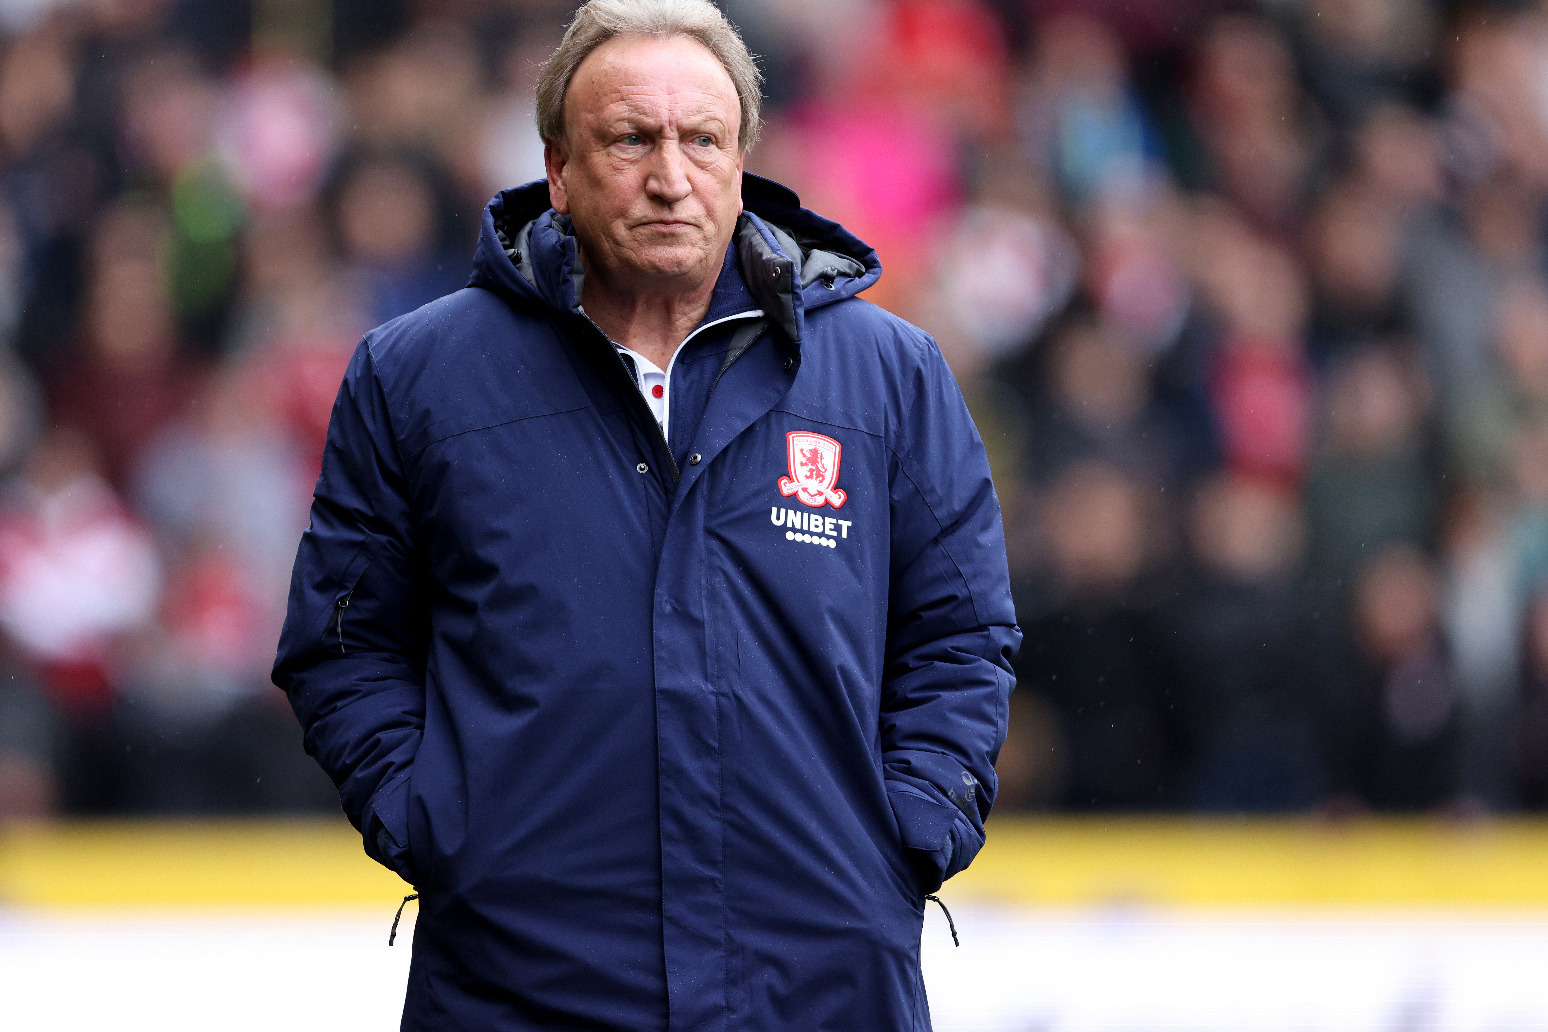 Neil Warnock says he may never watch football again when he quits management 